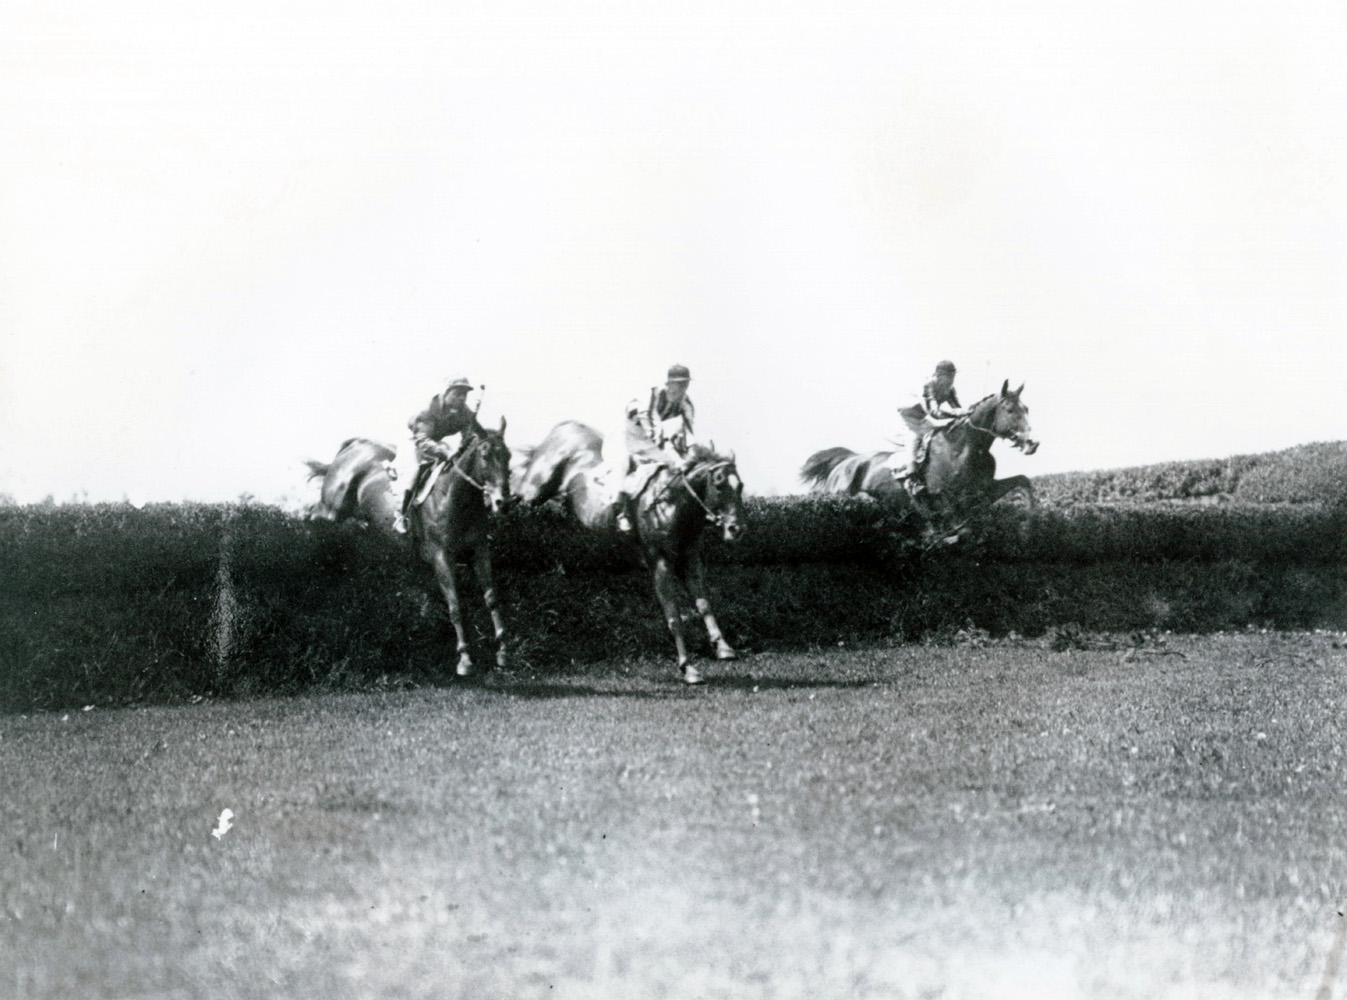 J. Dallet Byers and Fairmount (center) clearing a jump in the 1938 Charles Appleton Memorial Cup at Belmont (Keeneland Library Cook Collection)